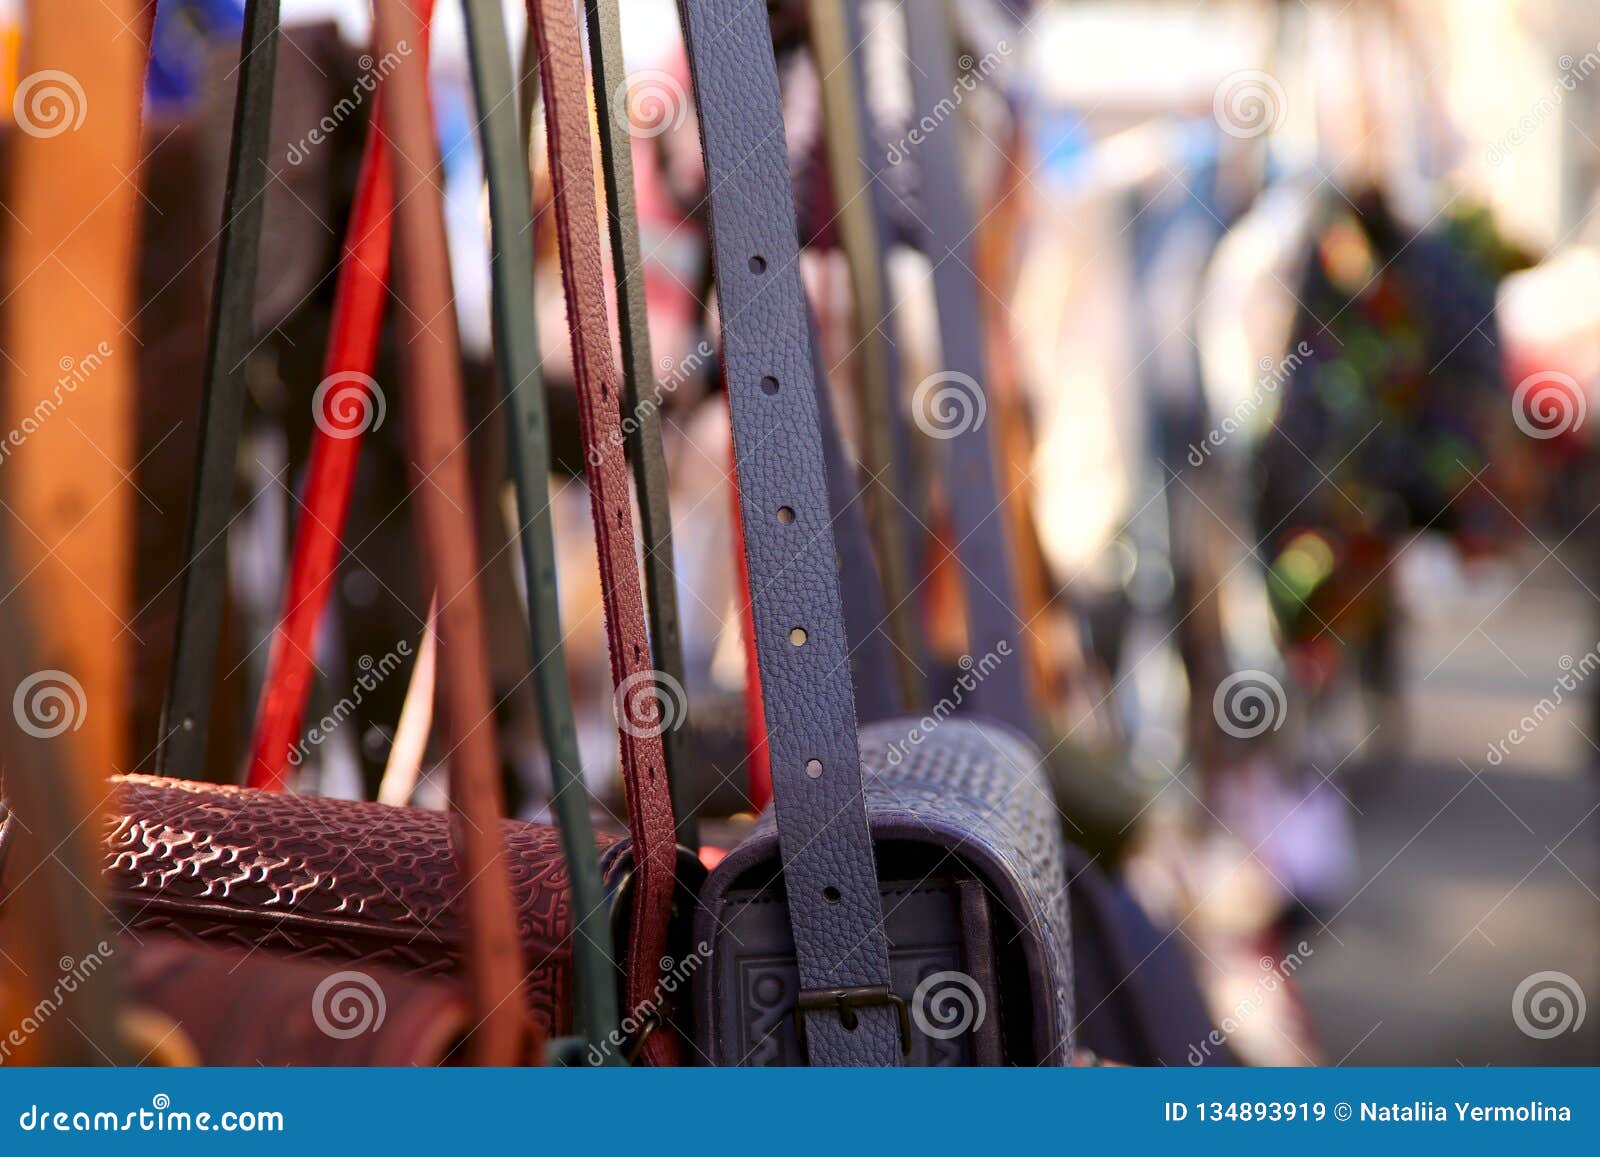 Multicolored Belts from Bags in the Shop Window on the Market. Stock ...